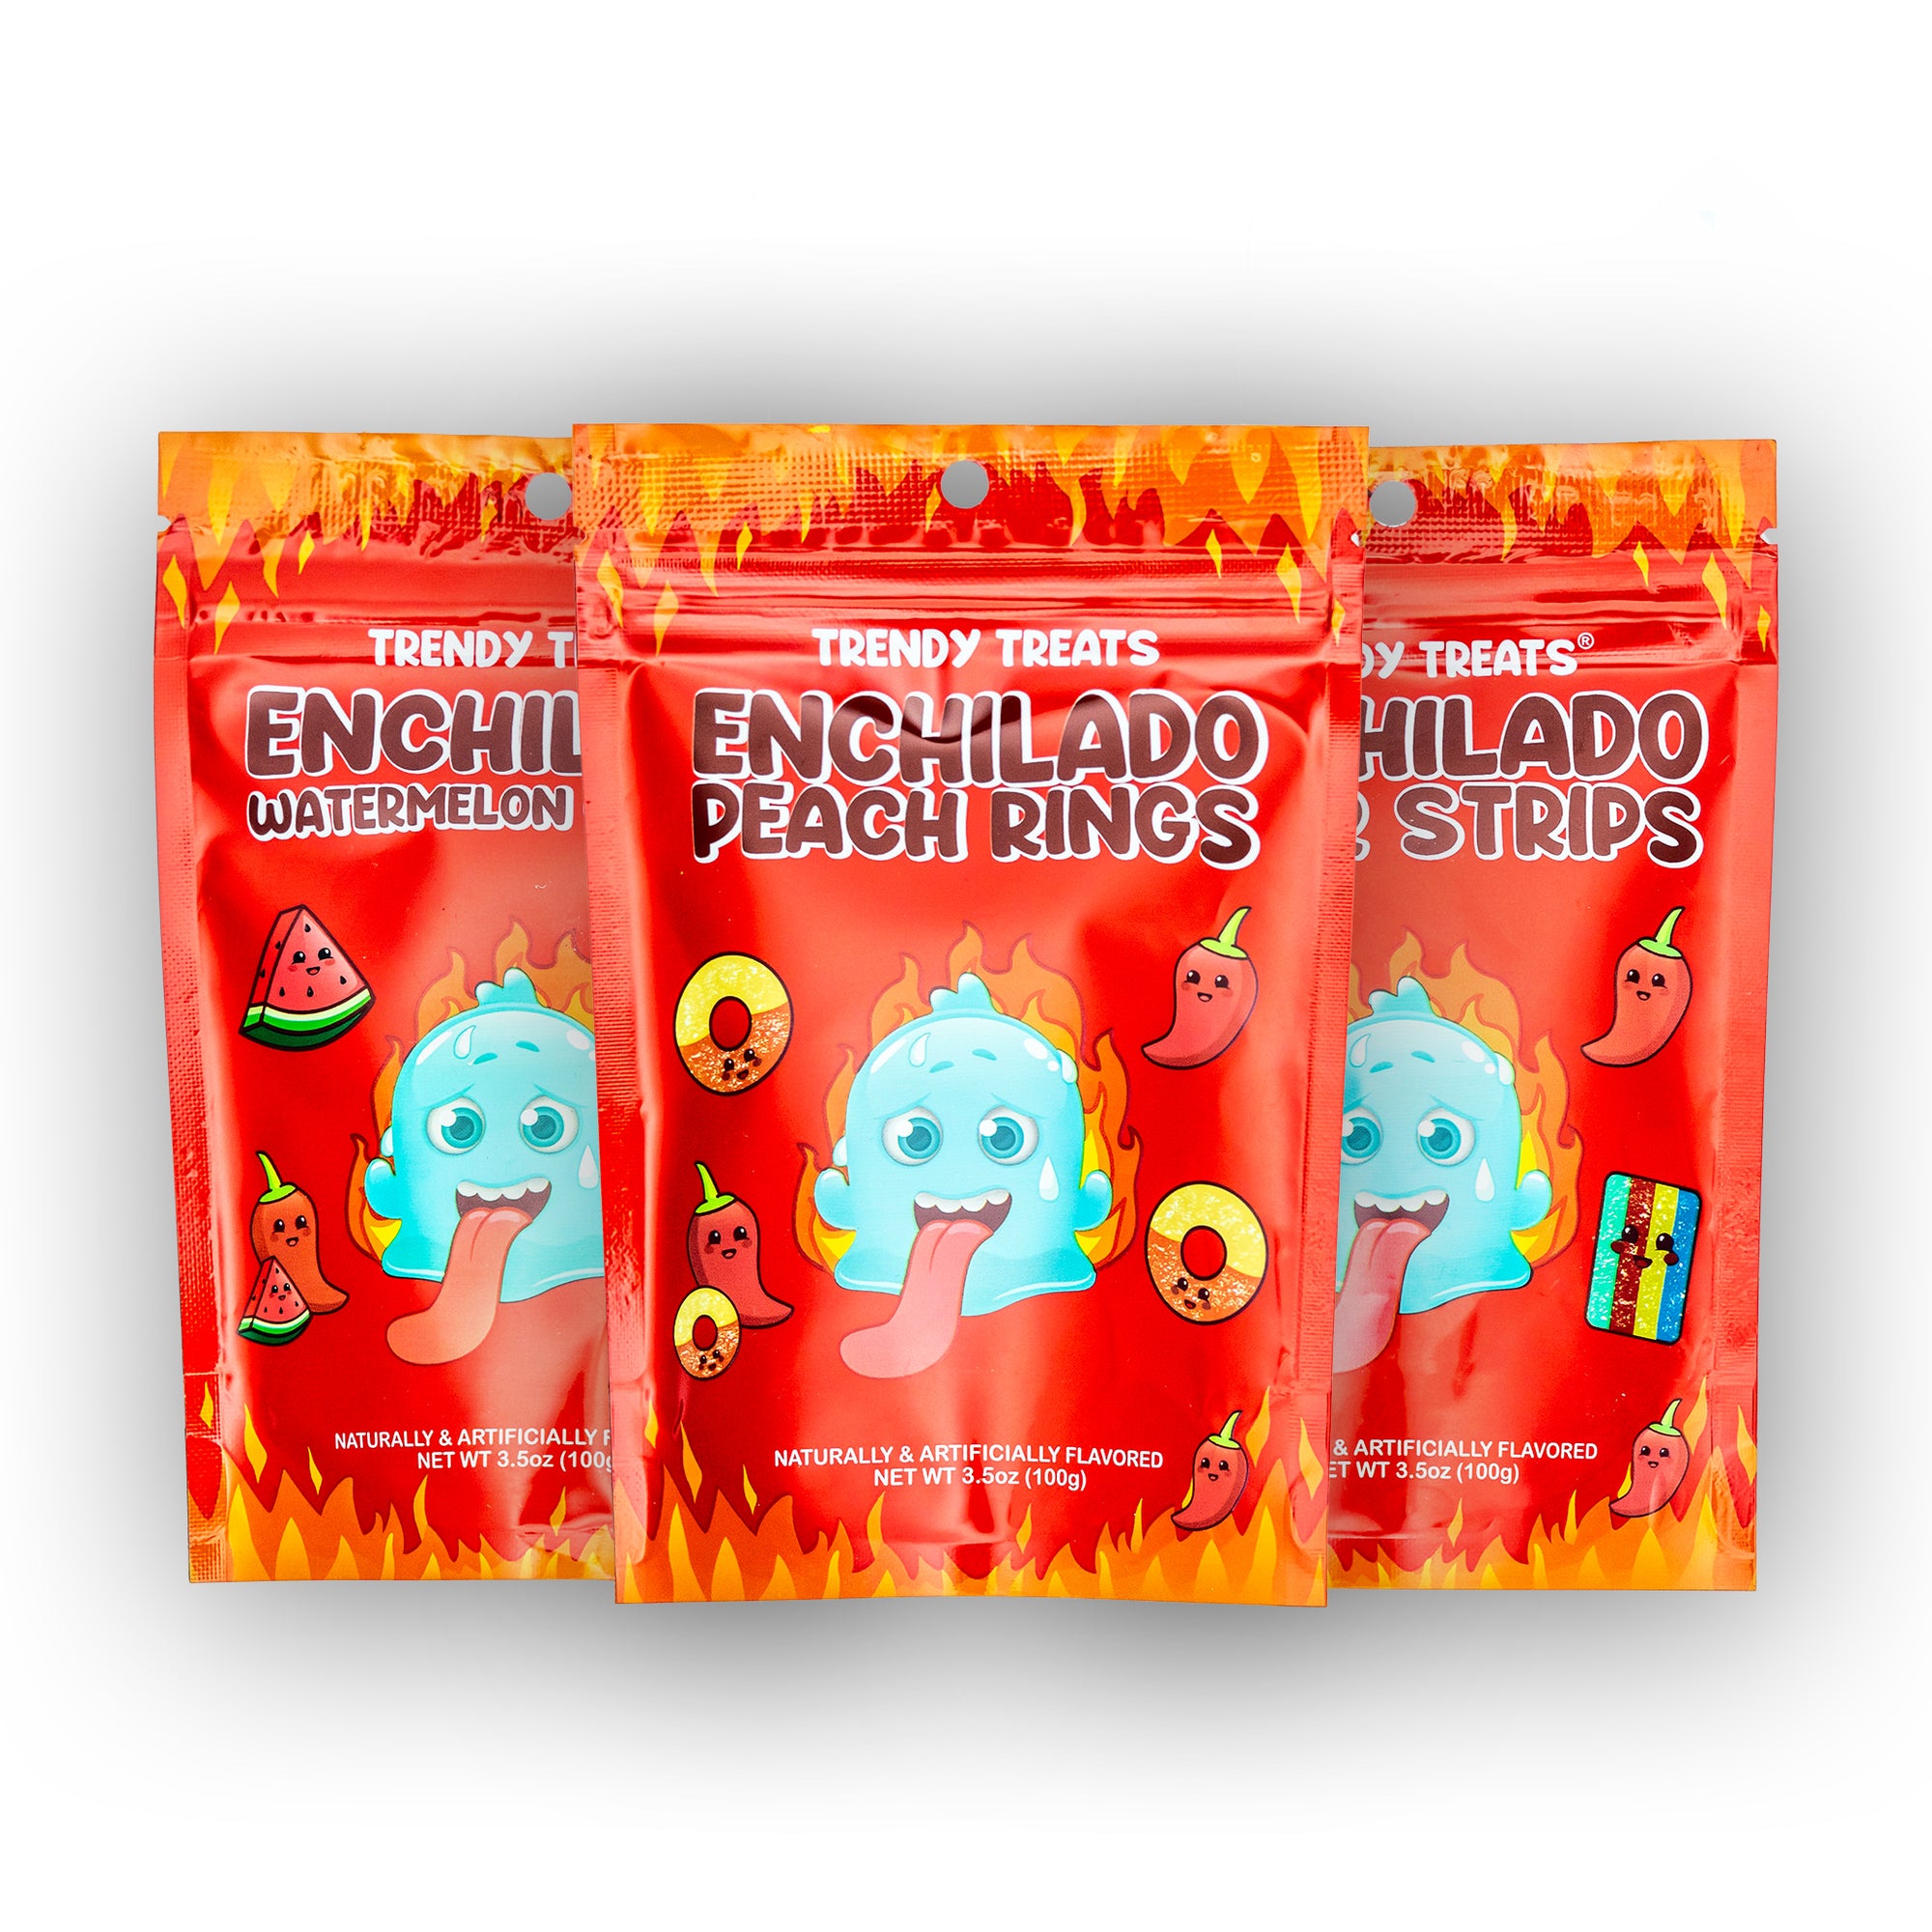 Chamoy Covered Candy